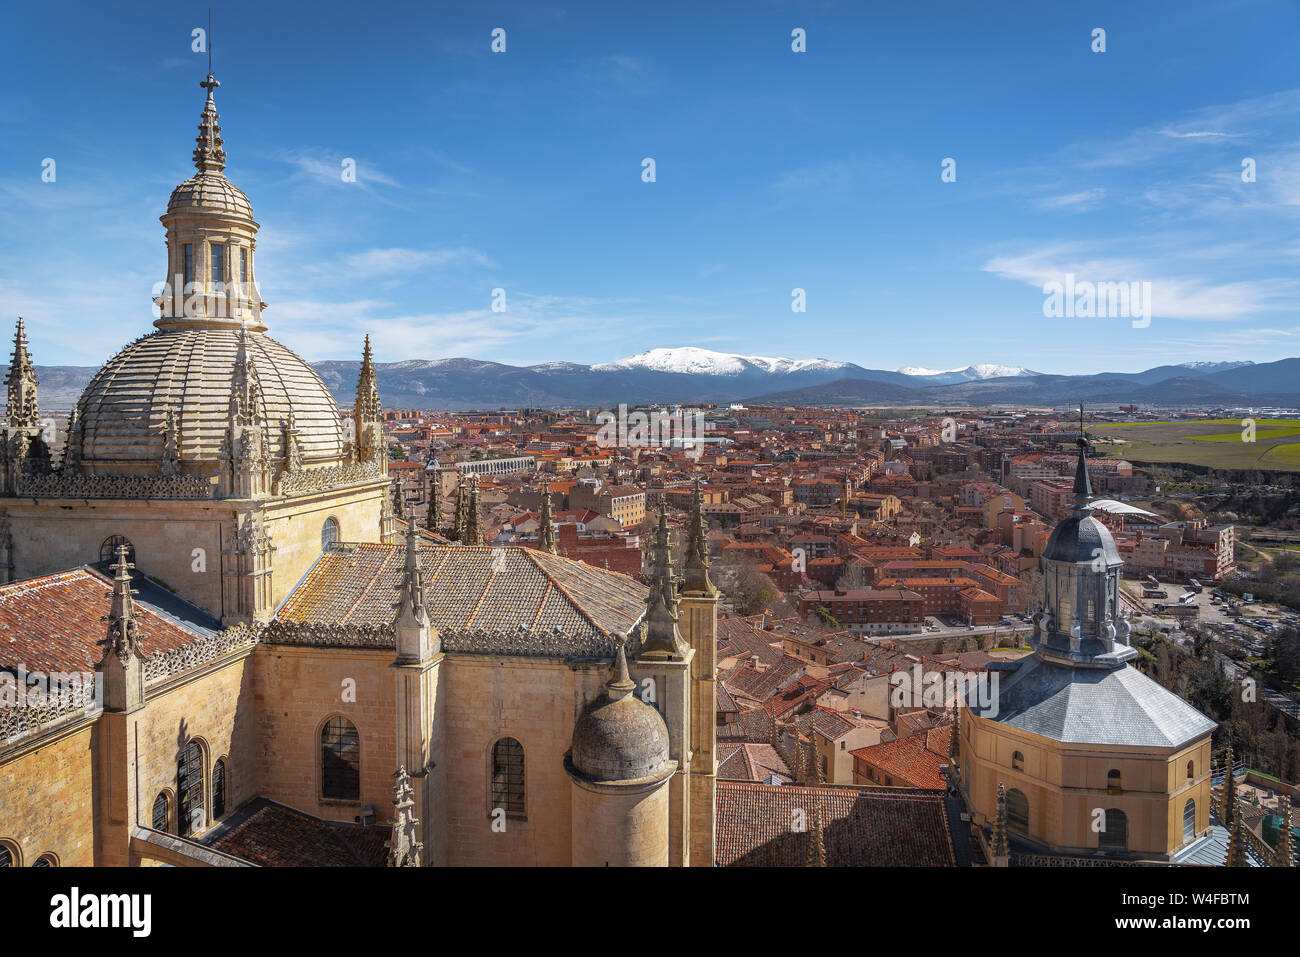 Aerial view of Segovia old city and Cathedral - Segovia, Castile and Leon, Spain Stock Photo